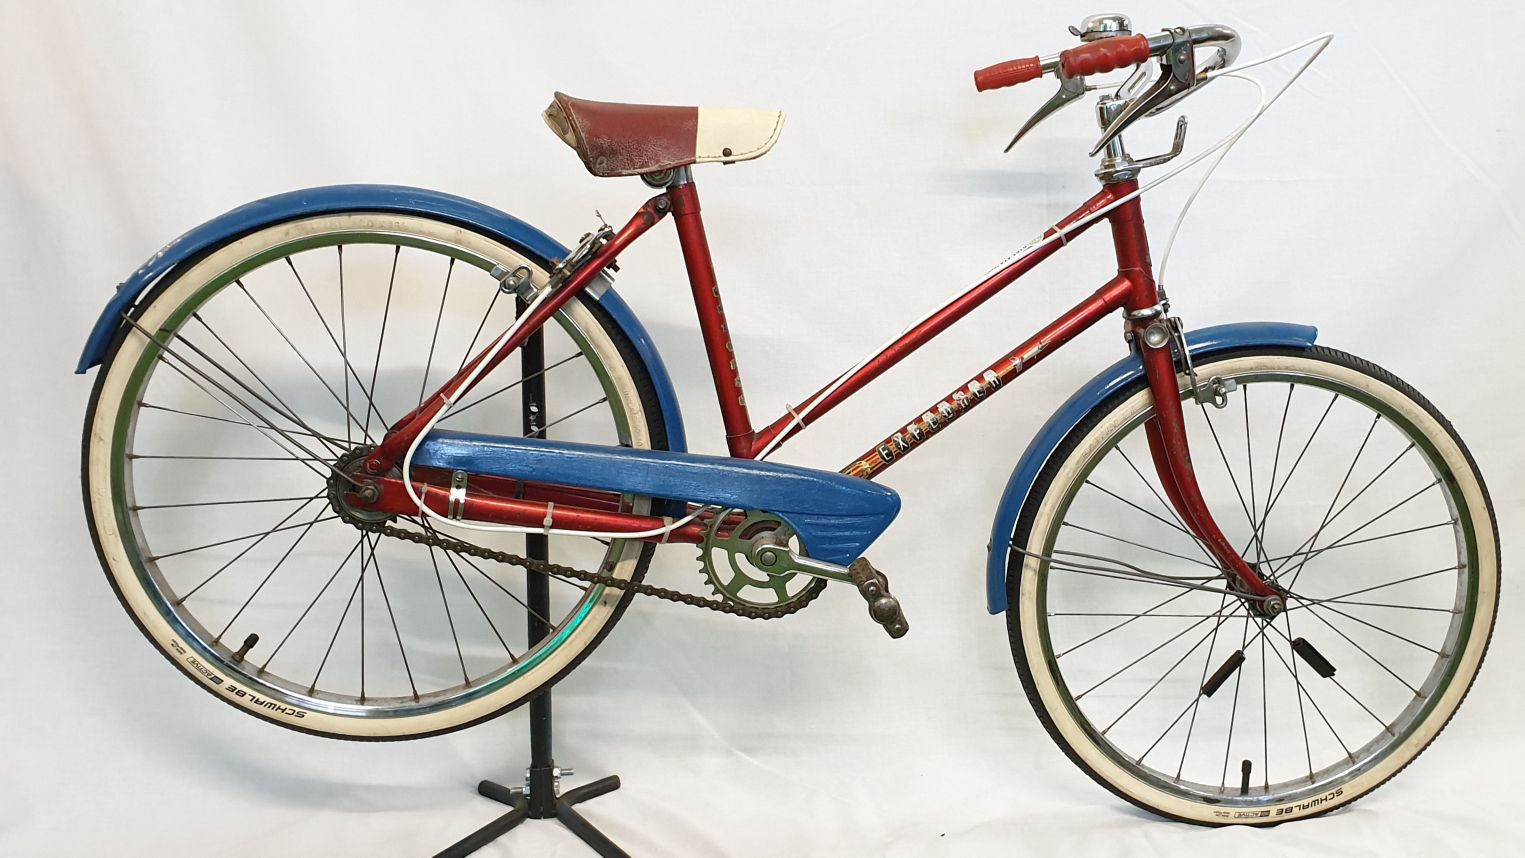 1950s raleigh bicycle